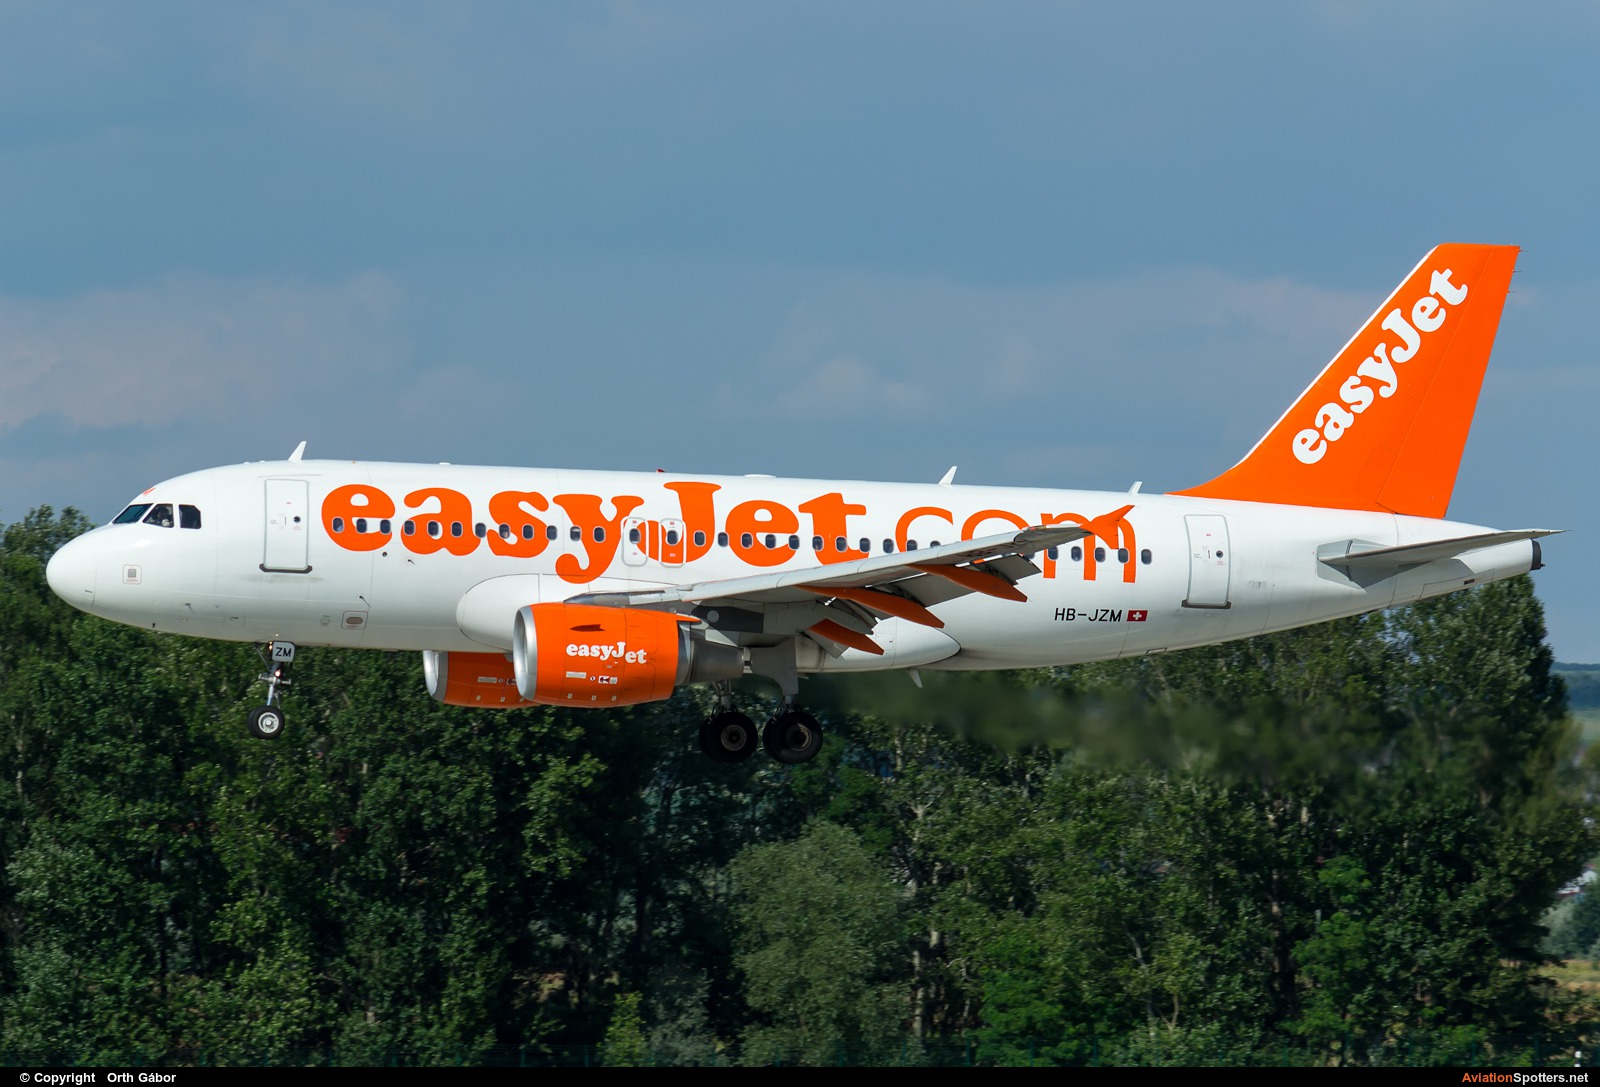 easyJet  -  A319-111  (HB-JZM) By Orth Gábor (Roodkop)